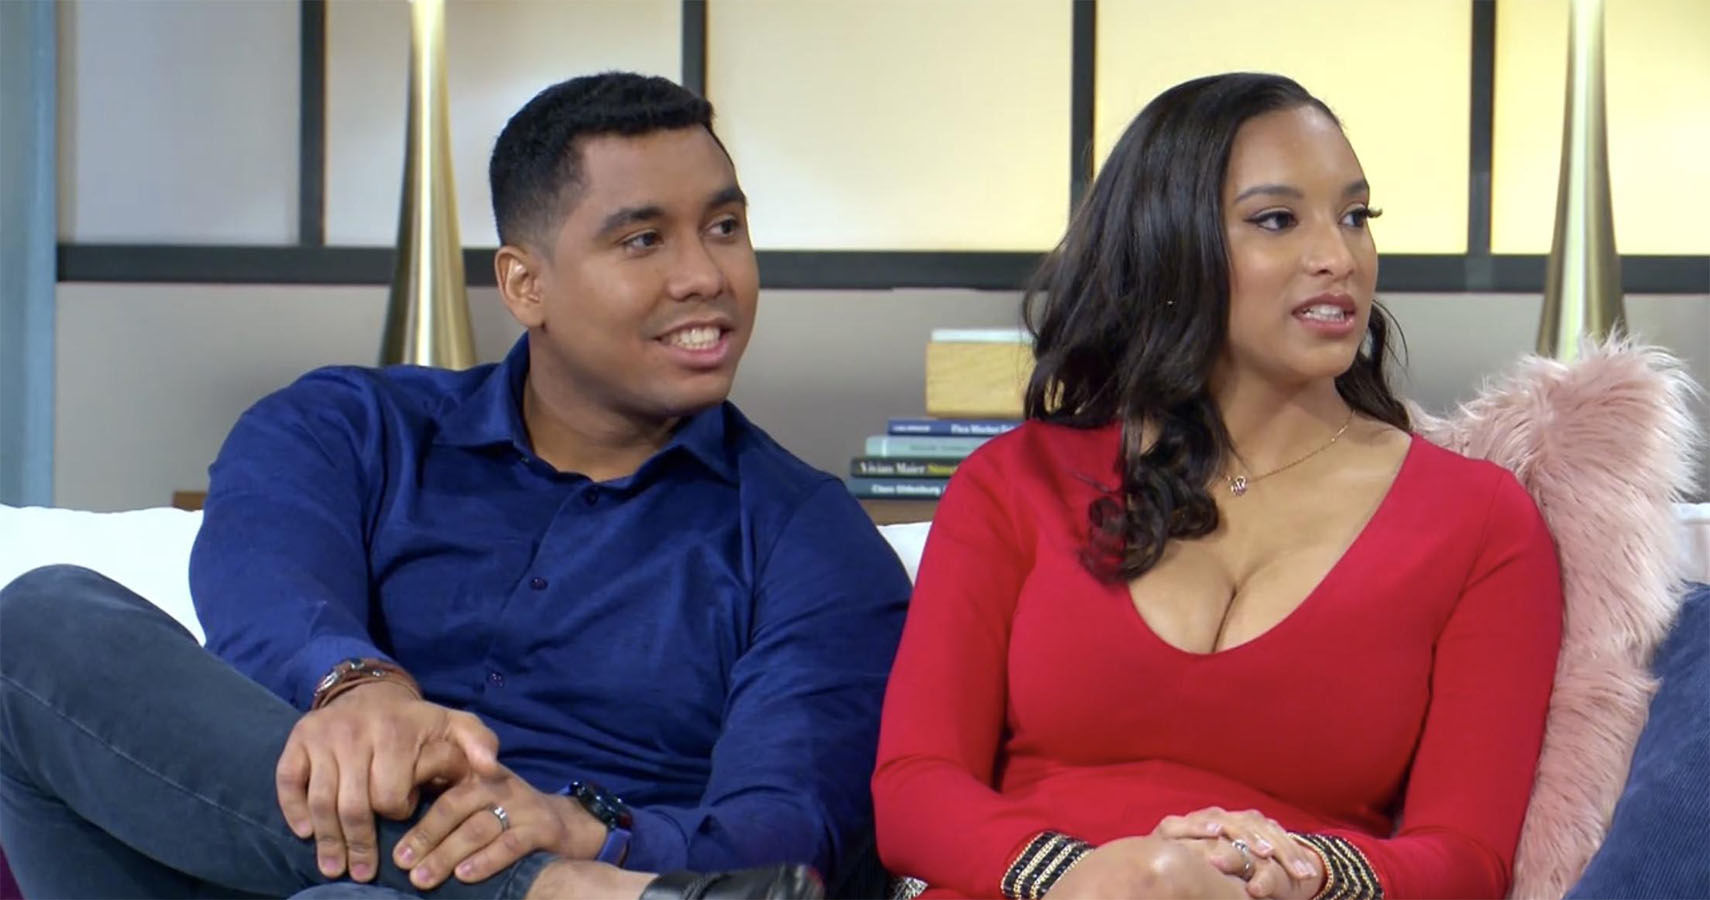 Are Chantel and Pedro Still Together / Married 2020? 90 Day Fiance Update